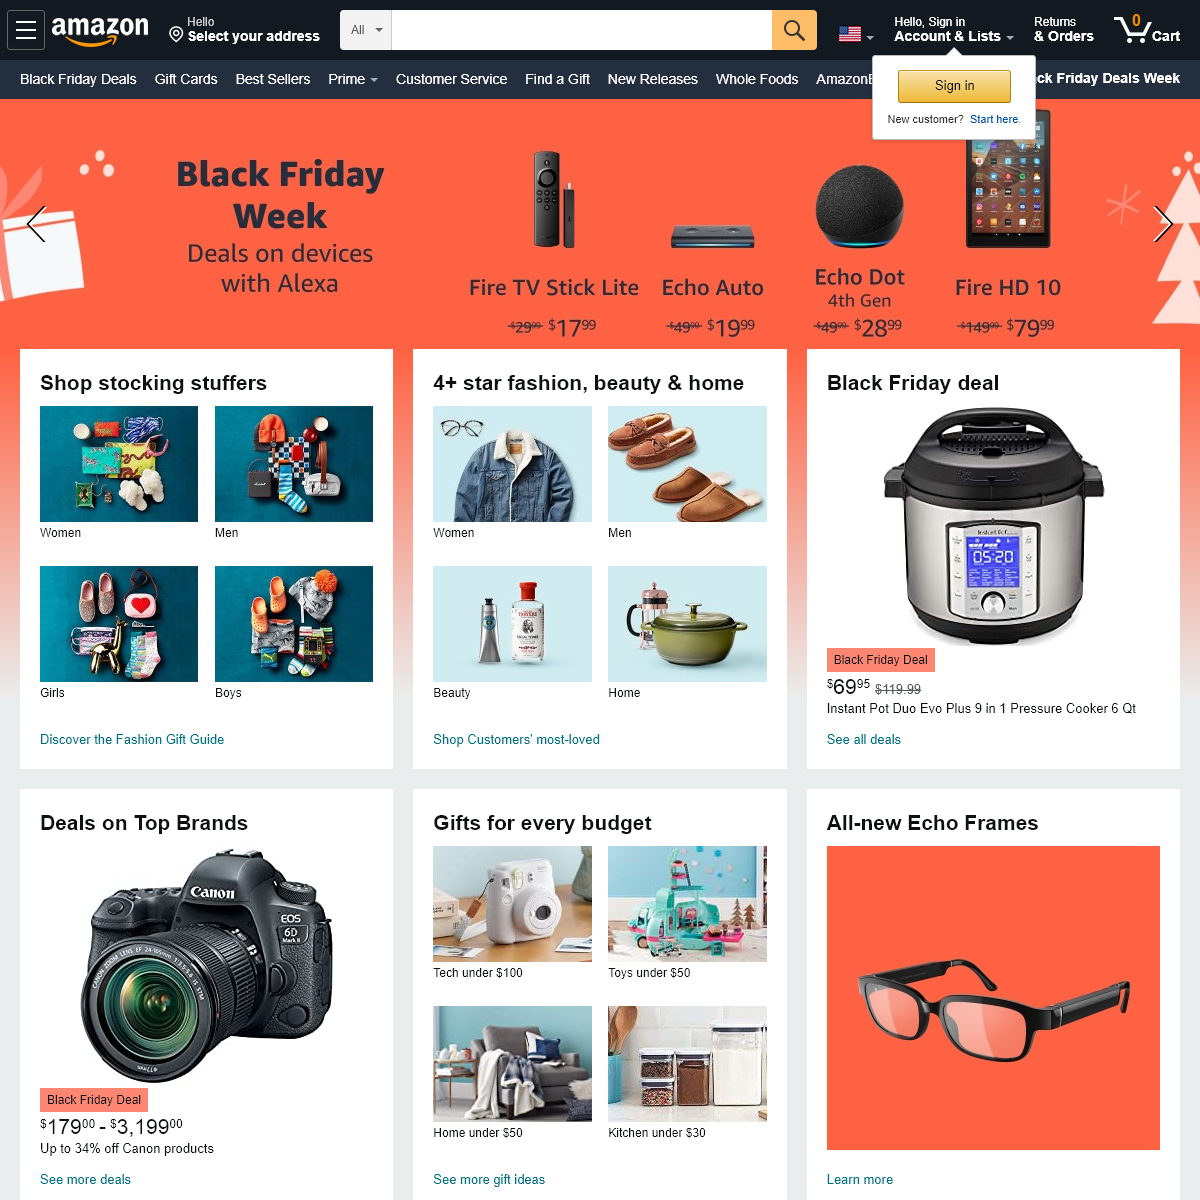 Amazon.com- Online Shopping for Electronics, Apparel, Computers, Books, DVDs & more